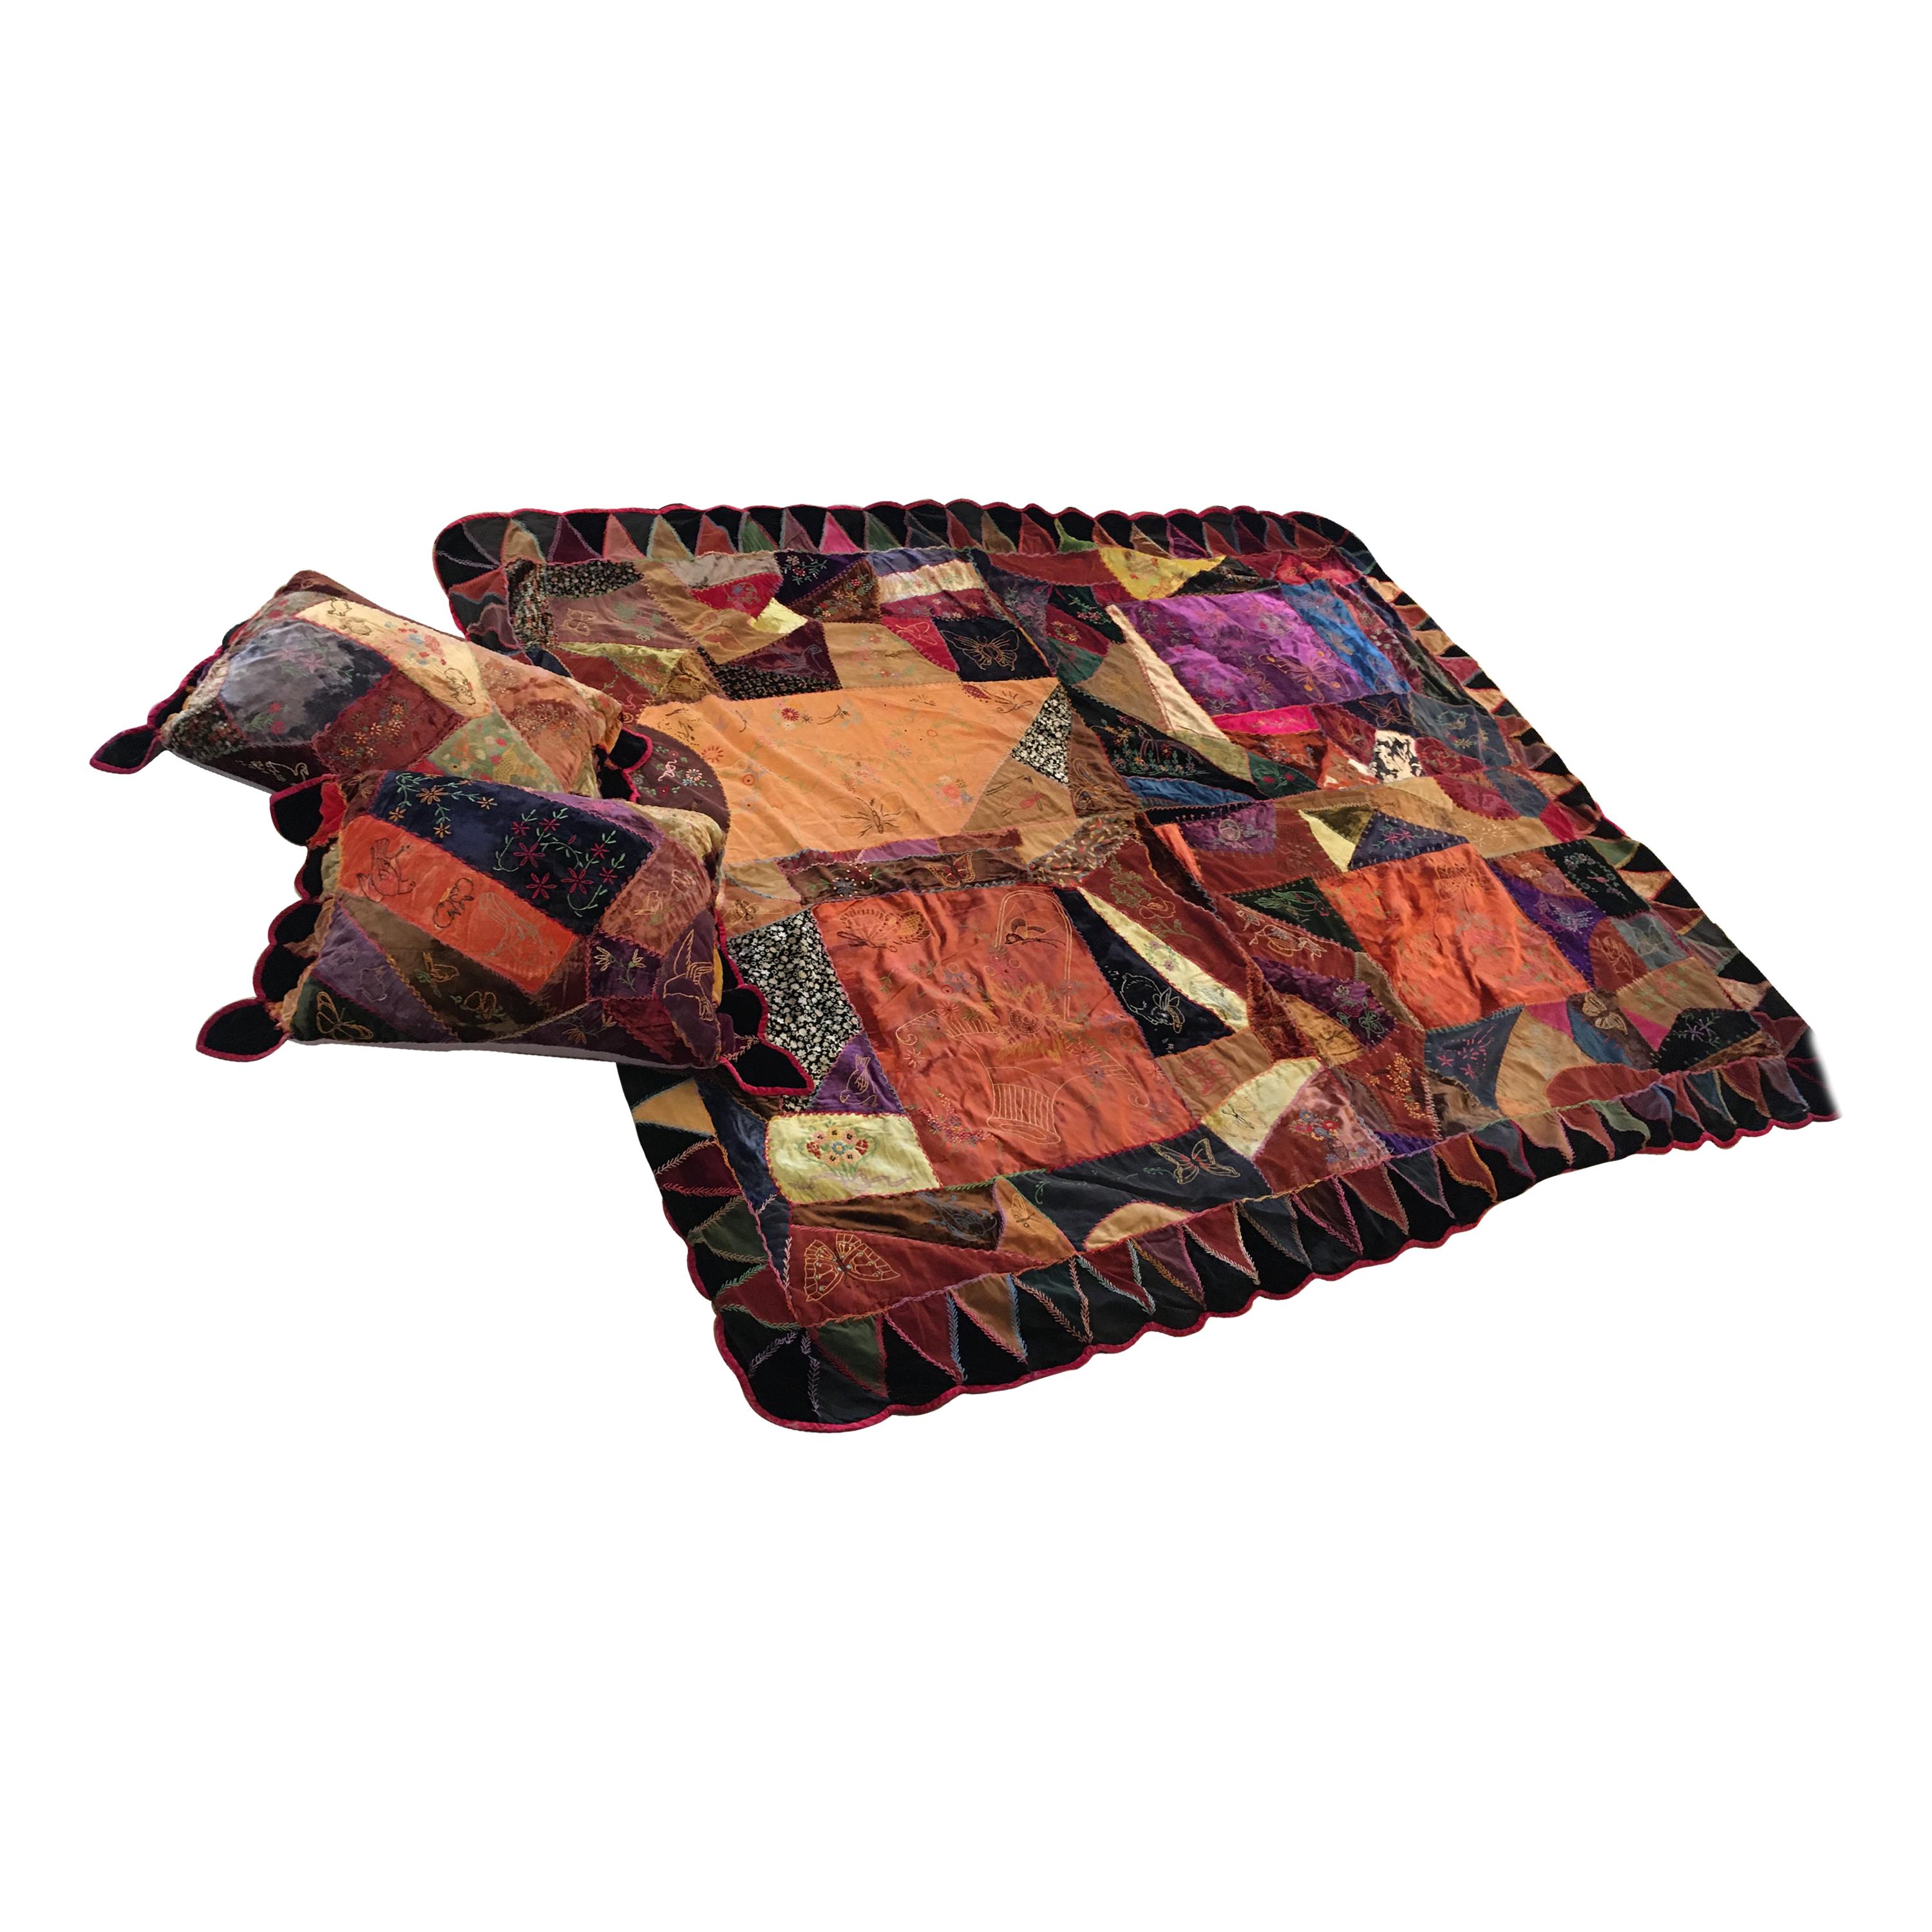 Richly Patterned Antique Crazy Quilt and Two Pillows For Sale